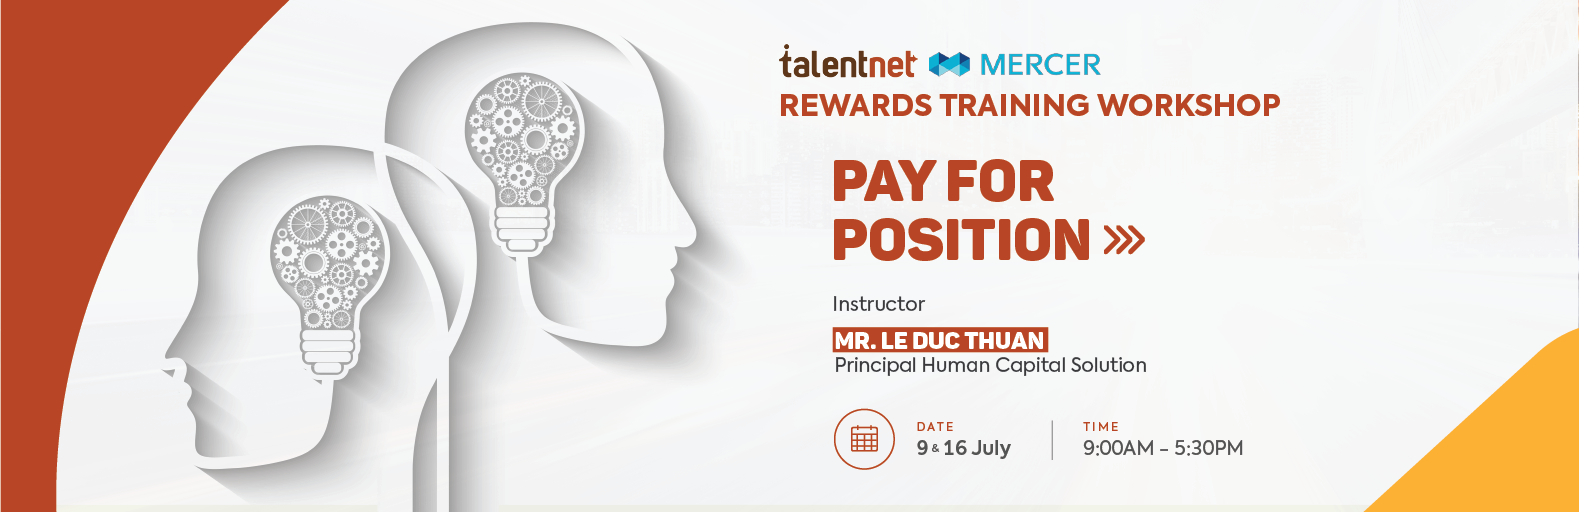 On the 9th of July 2021, the workshop Pay for position will take place to accompany the business people value insight about payment.